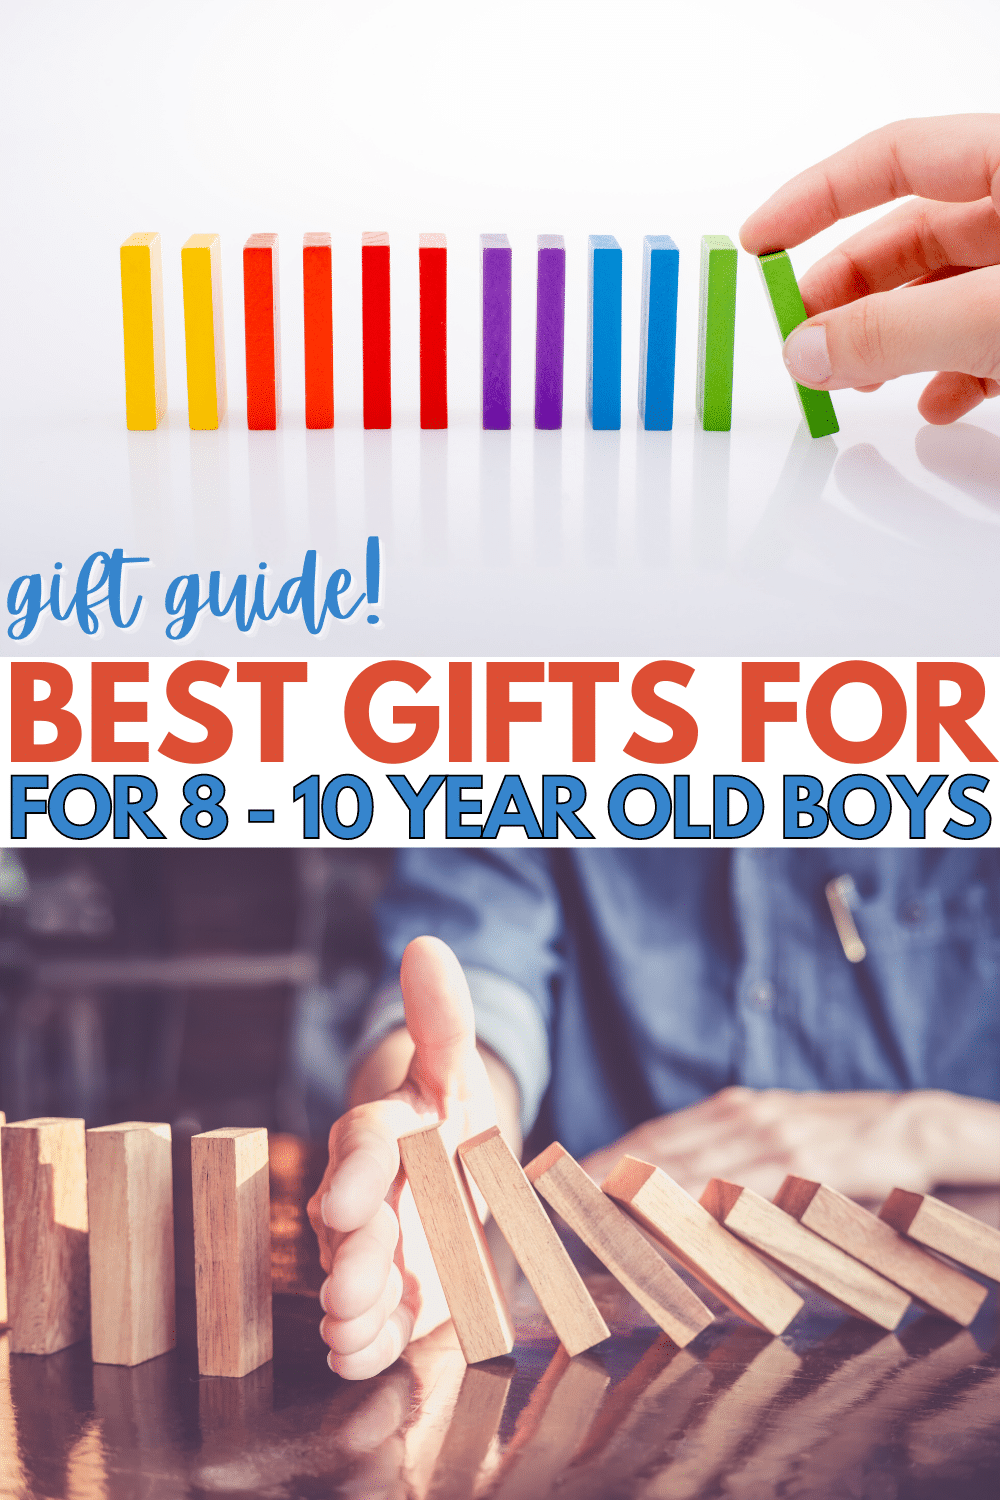 Best Gifts for 8 to 10-Year Old Boys with a title text reading Gift guide! Best Gifts For for 8-10 year old